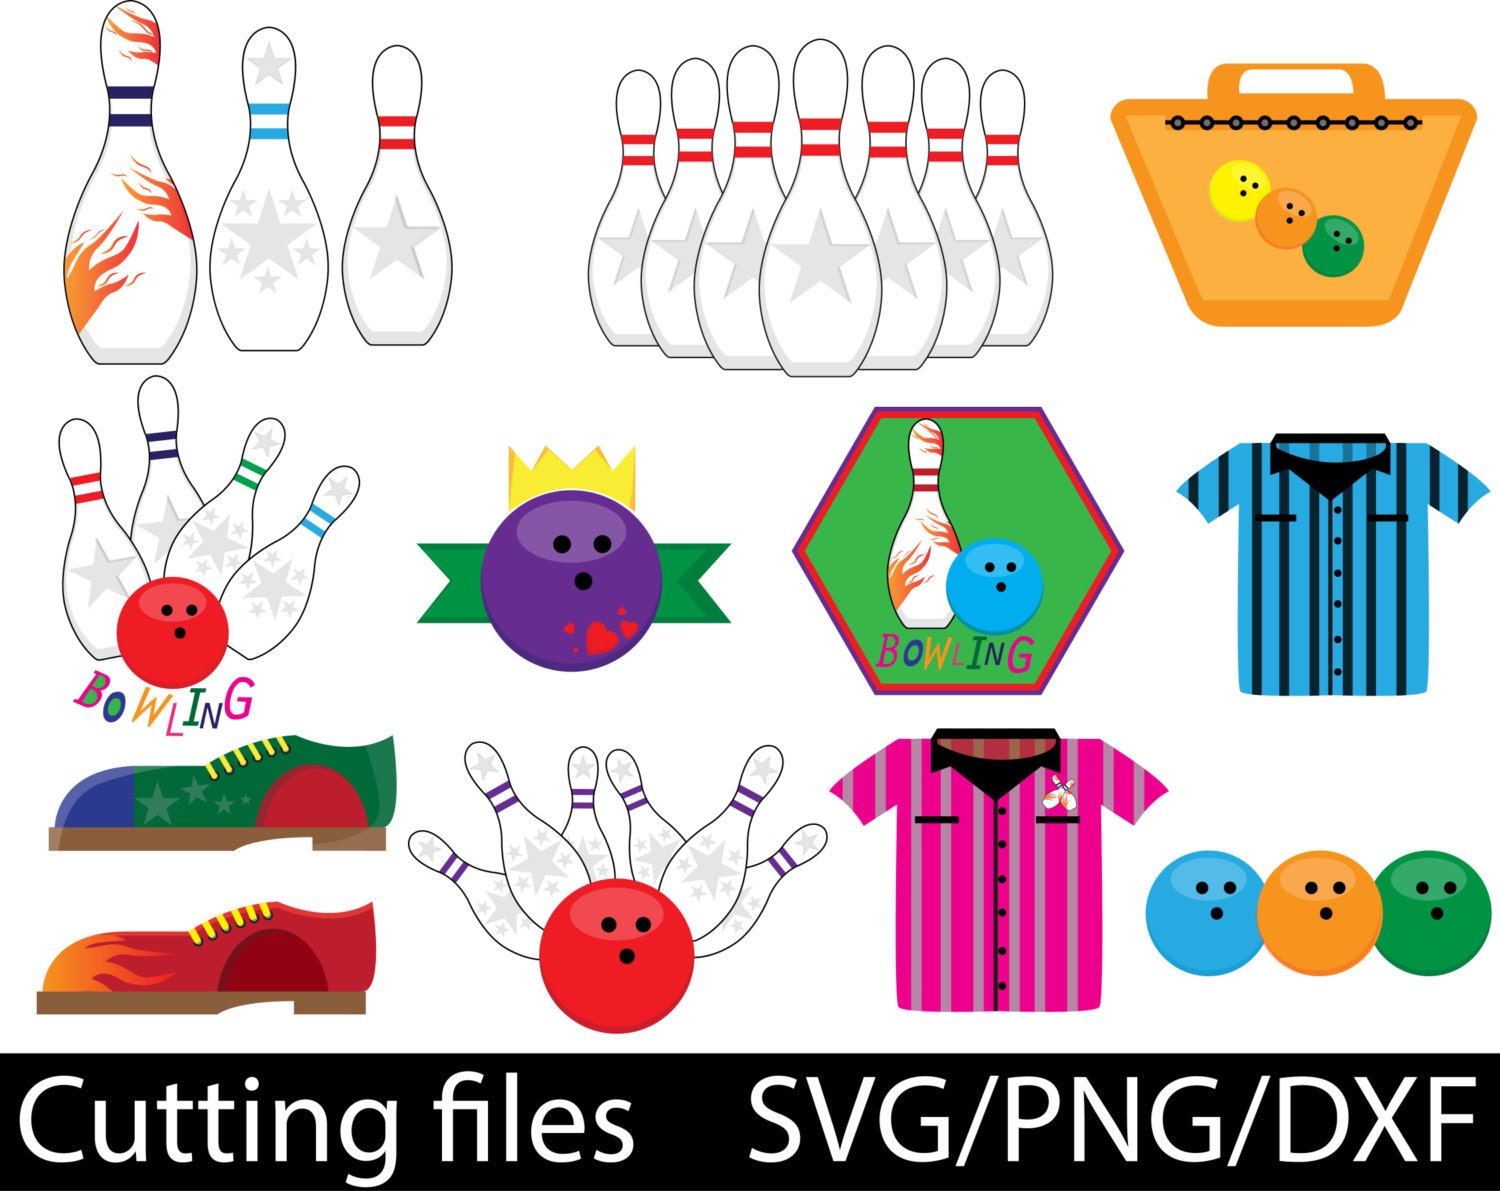 Download SVG DXF Eps Cutting Files Bowling Cutting Files Digital